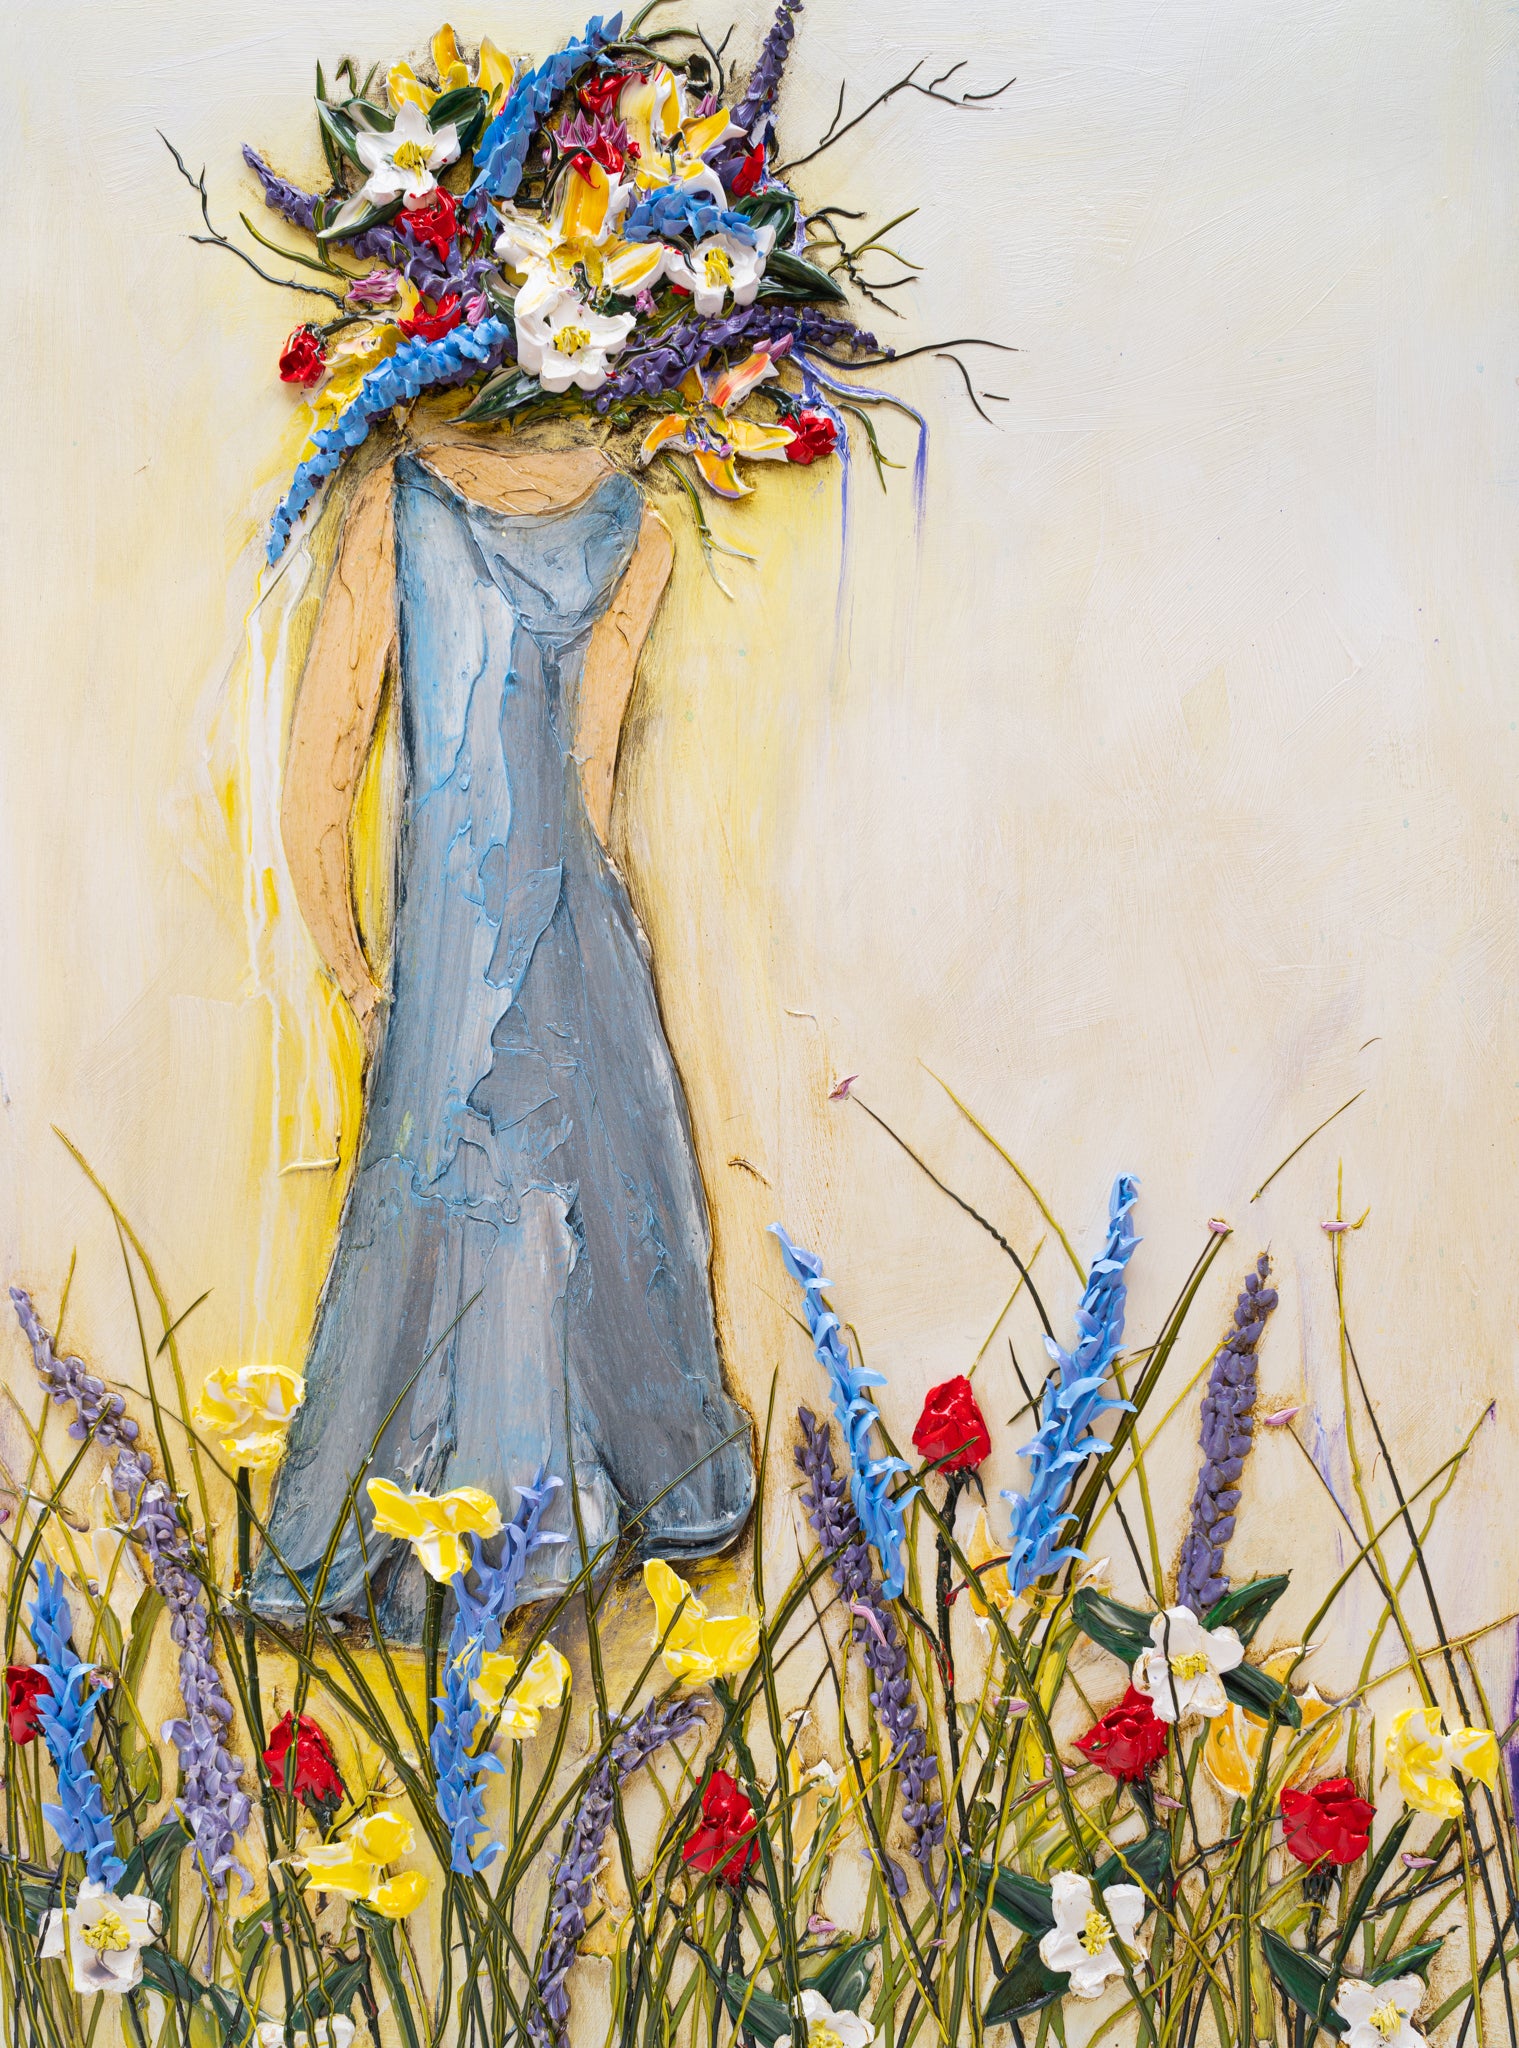 Girl and Flowers, 36x48